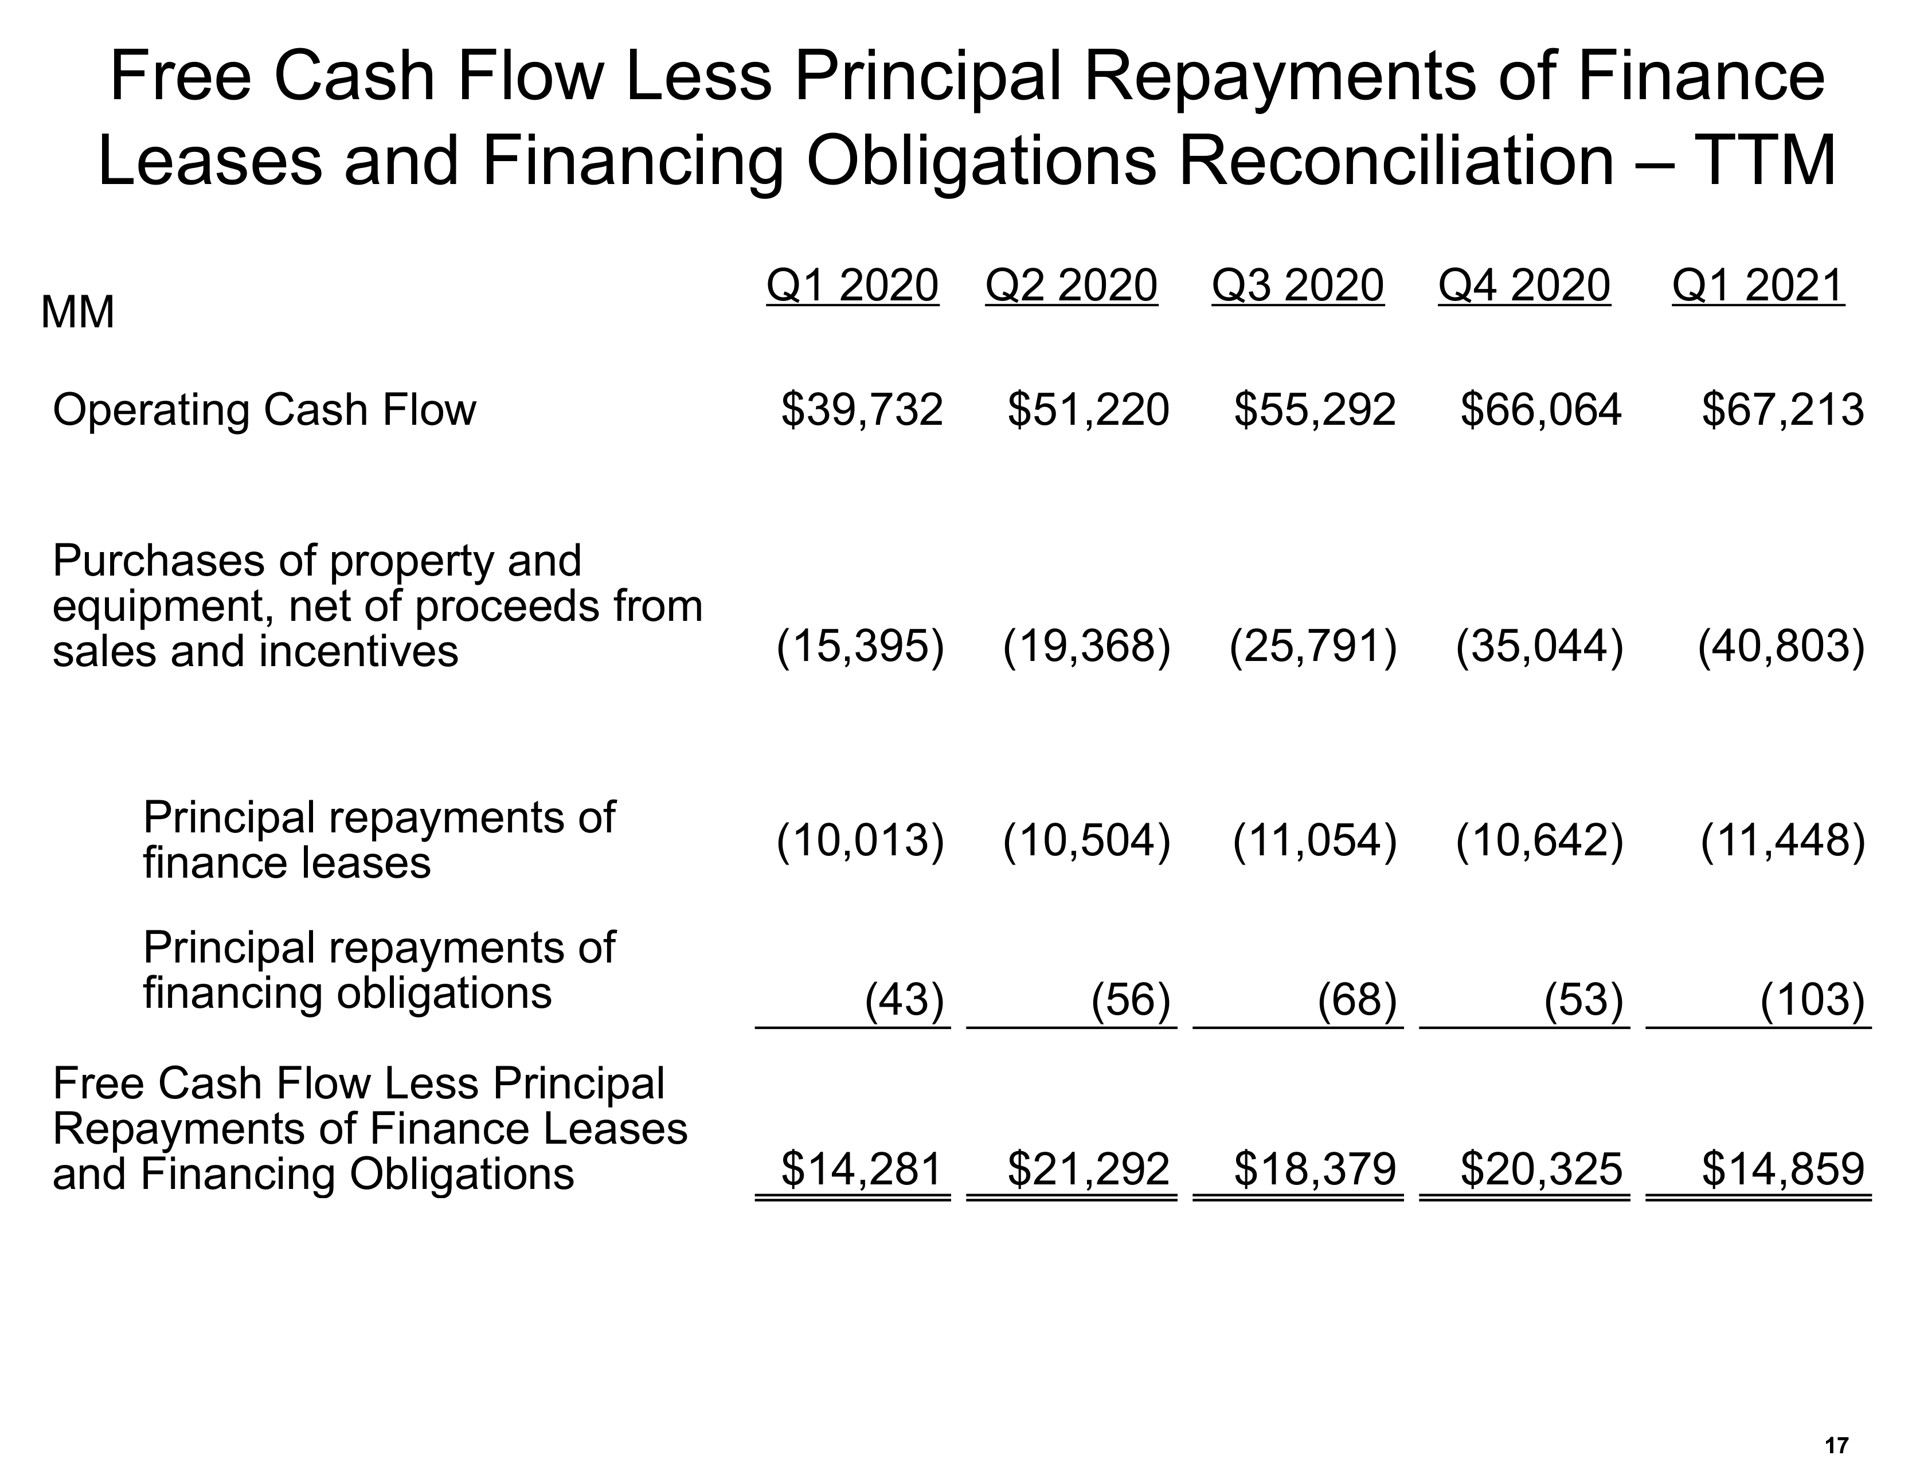 free cash flow less principal repayments of finance leases and financing obligations reconciliation mens | Amazon